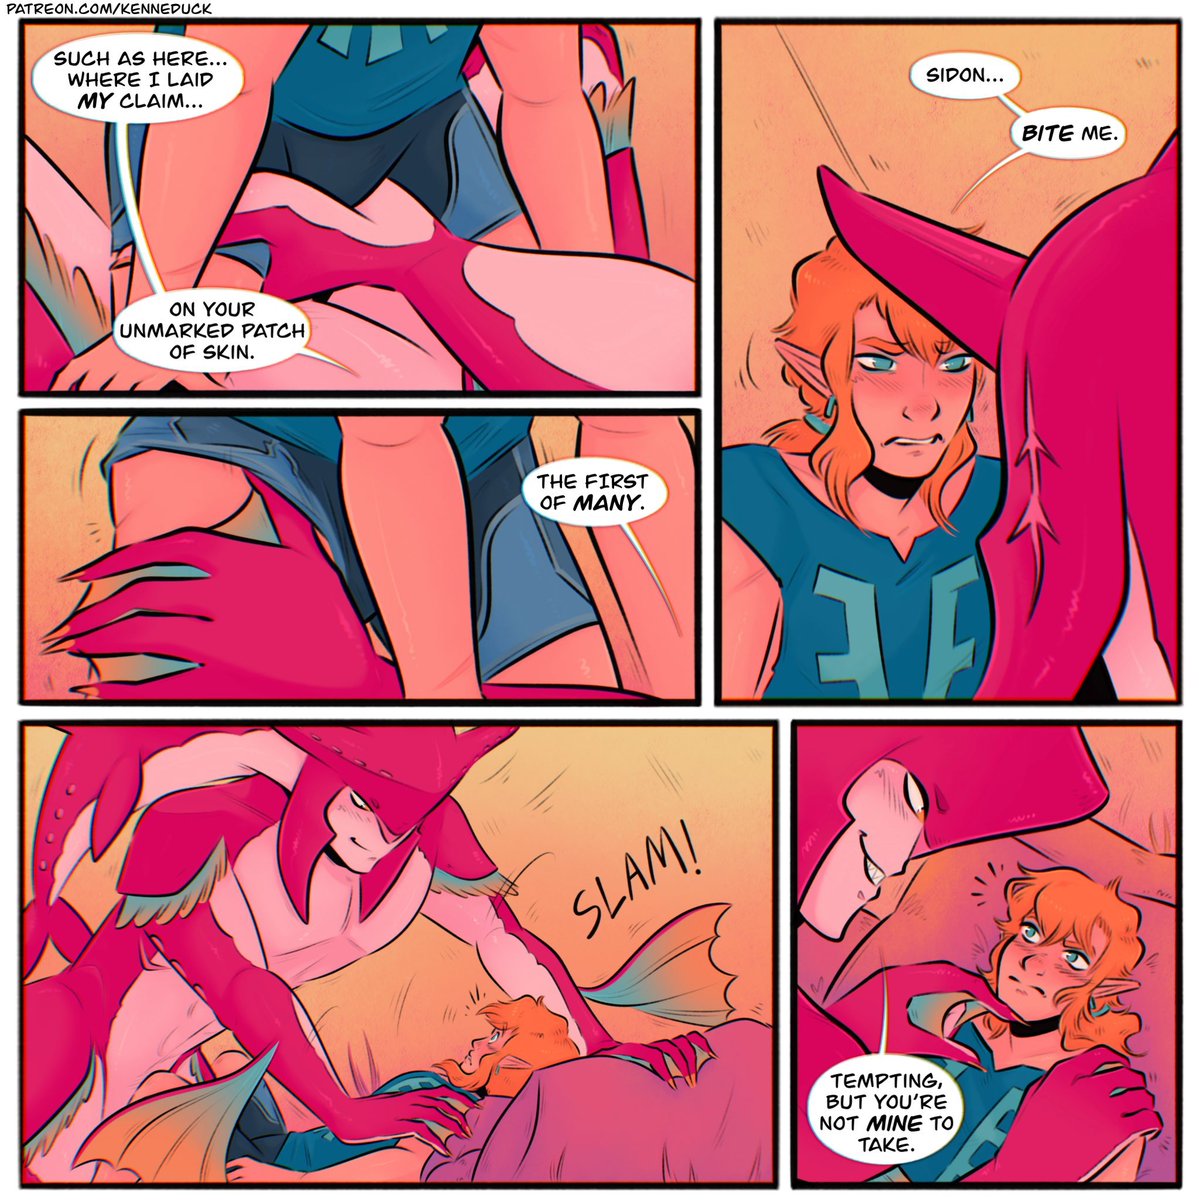 Pages 1-2/5 of my spicy #sidlink comic~ Rest is you know where~ 🌸💕
#zelda #sidon #zeldafanart